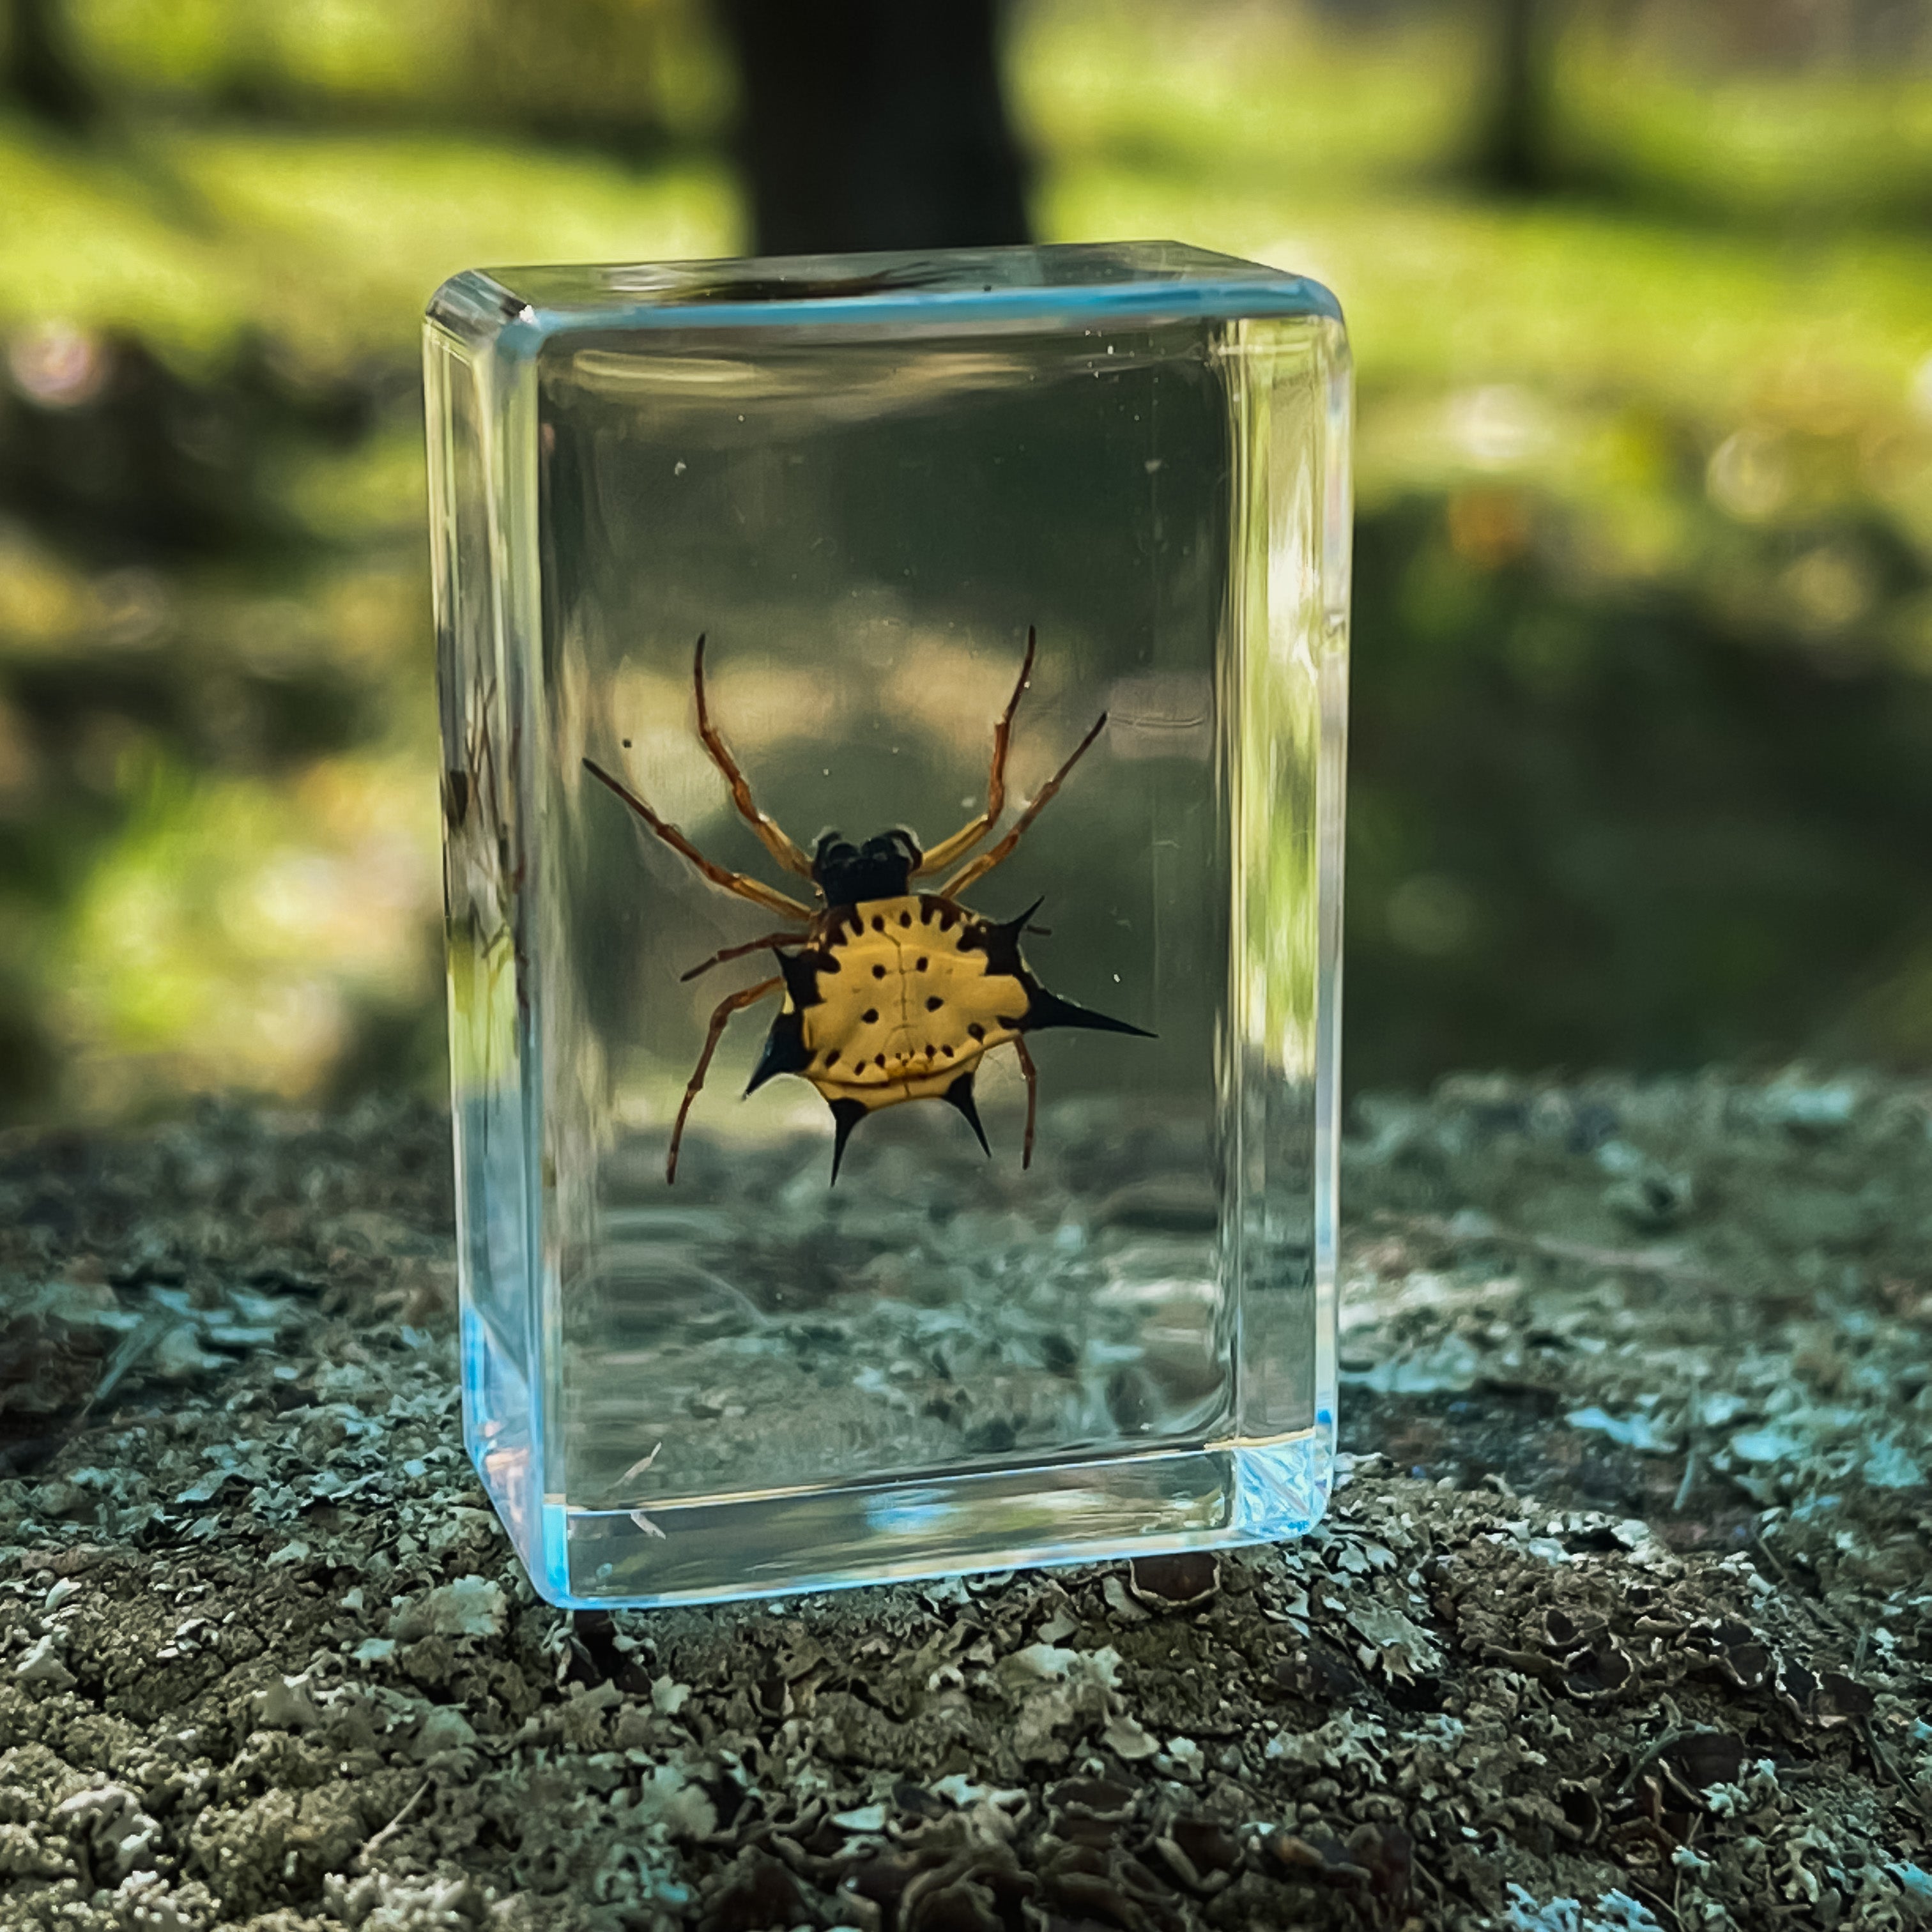 Hasselt’s Spiny Spider in Lucite